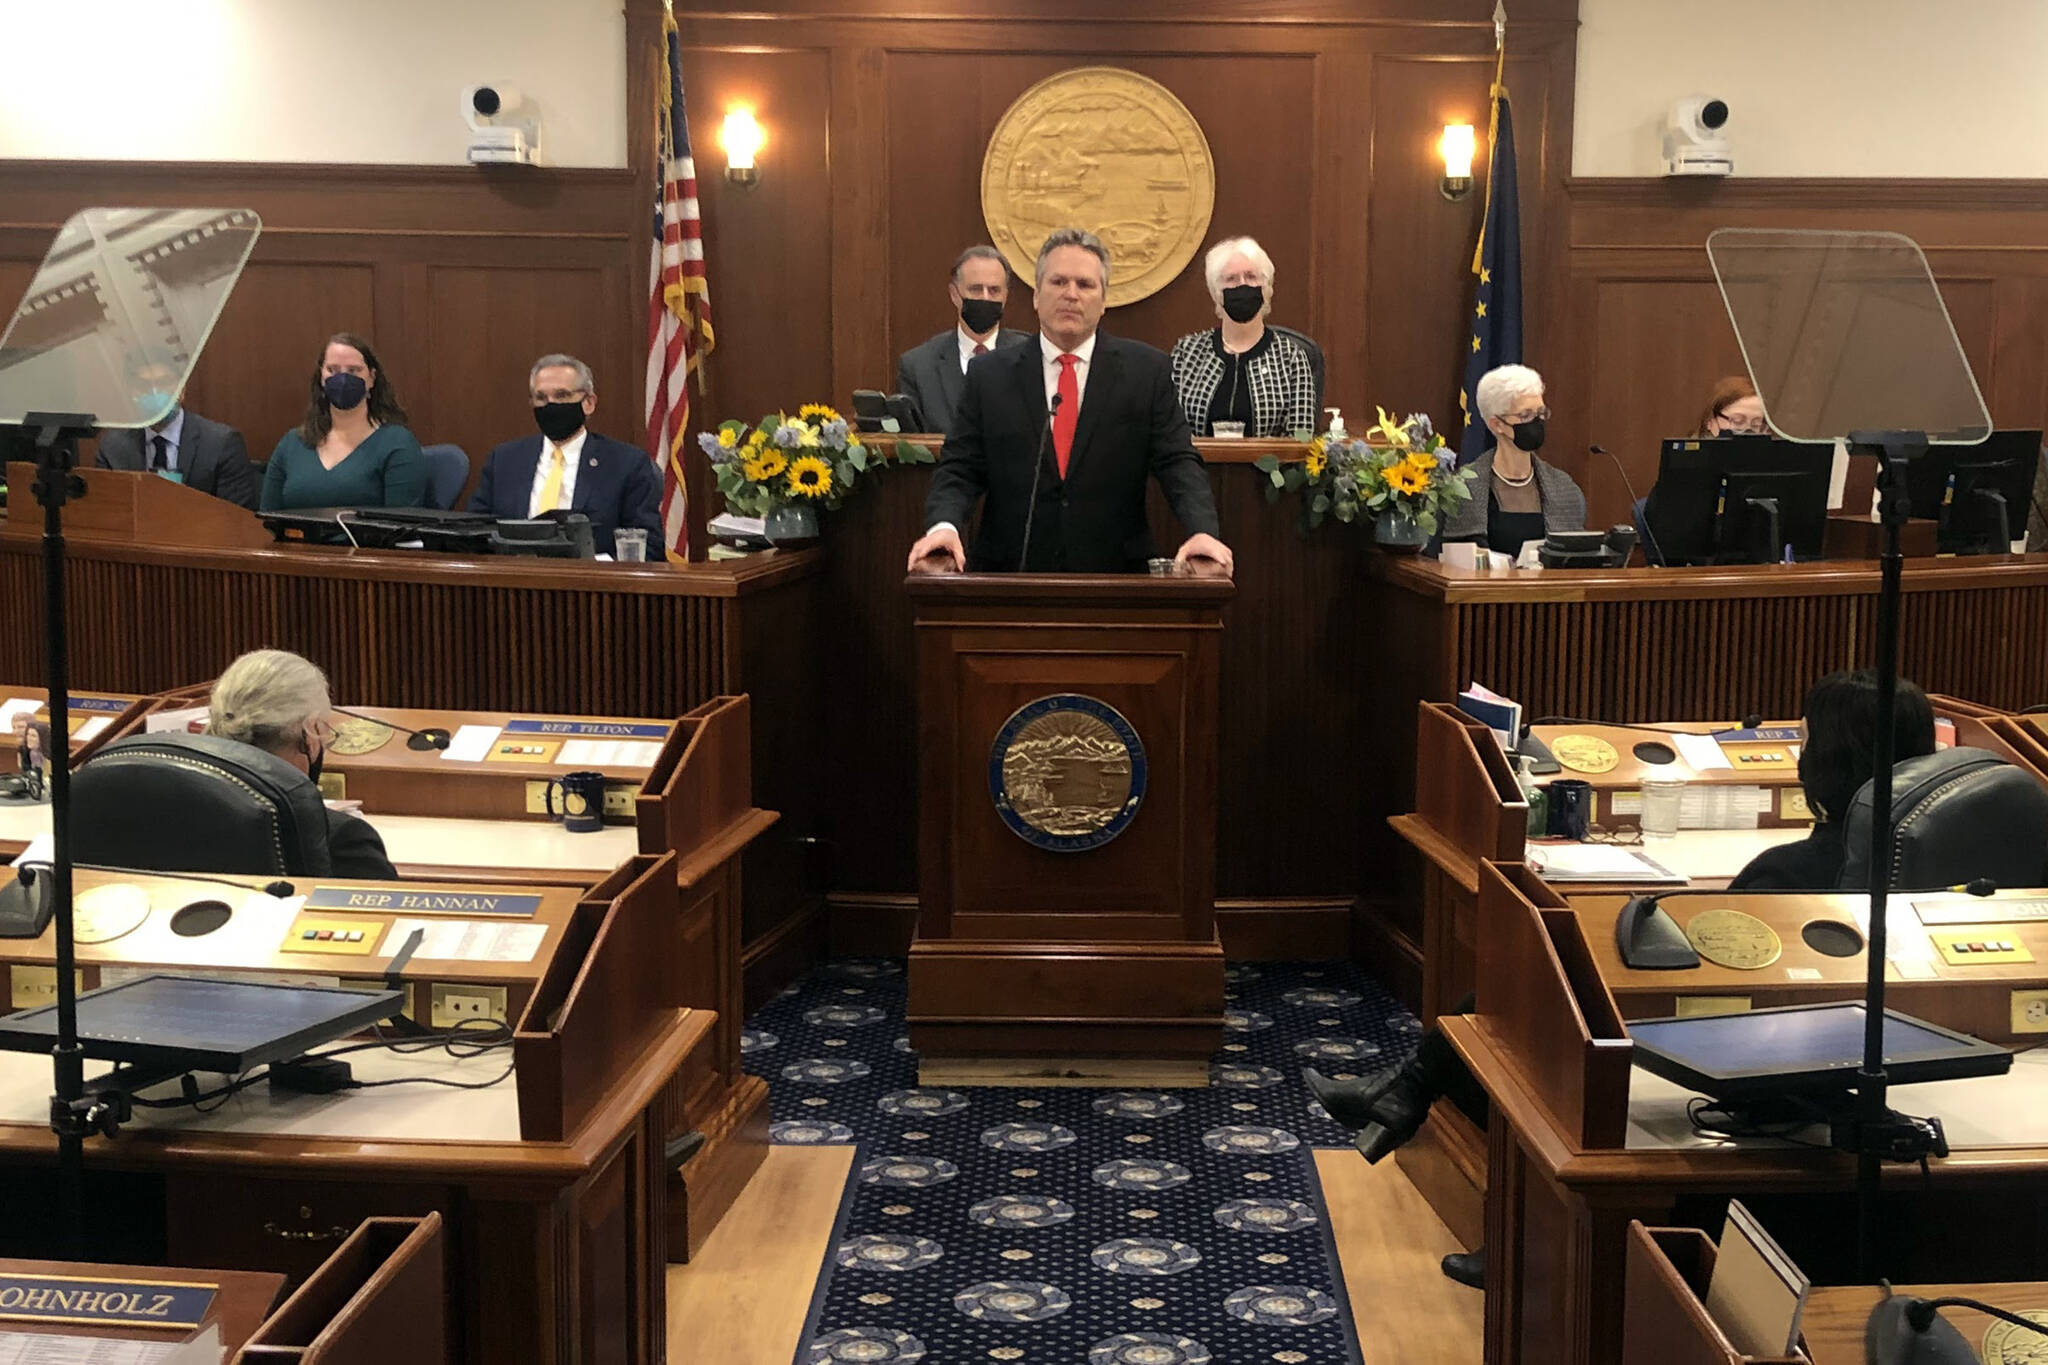 Gov. Mike Dunleavy delivers his State of the State address before a joint session of the Alaska State Legislature. (Peter Segall / Juneau Empire File)